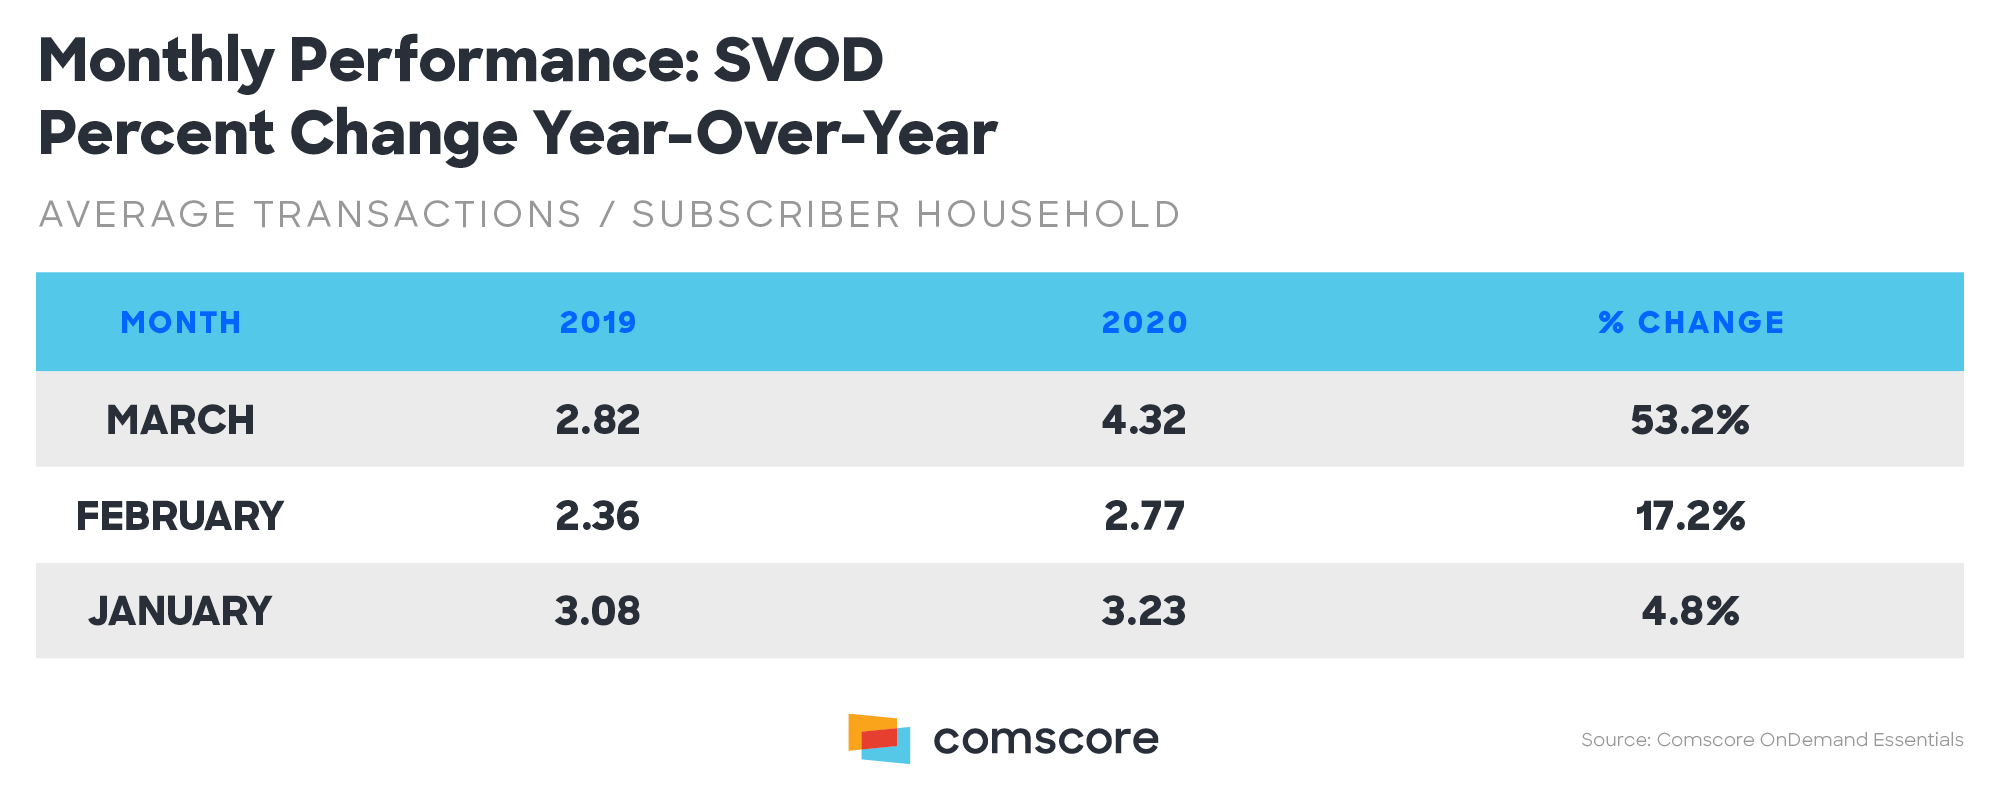 Monthly Performance All SVOD Percent Change Year over Year